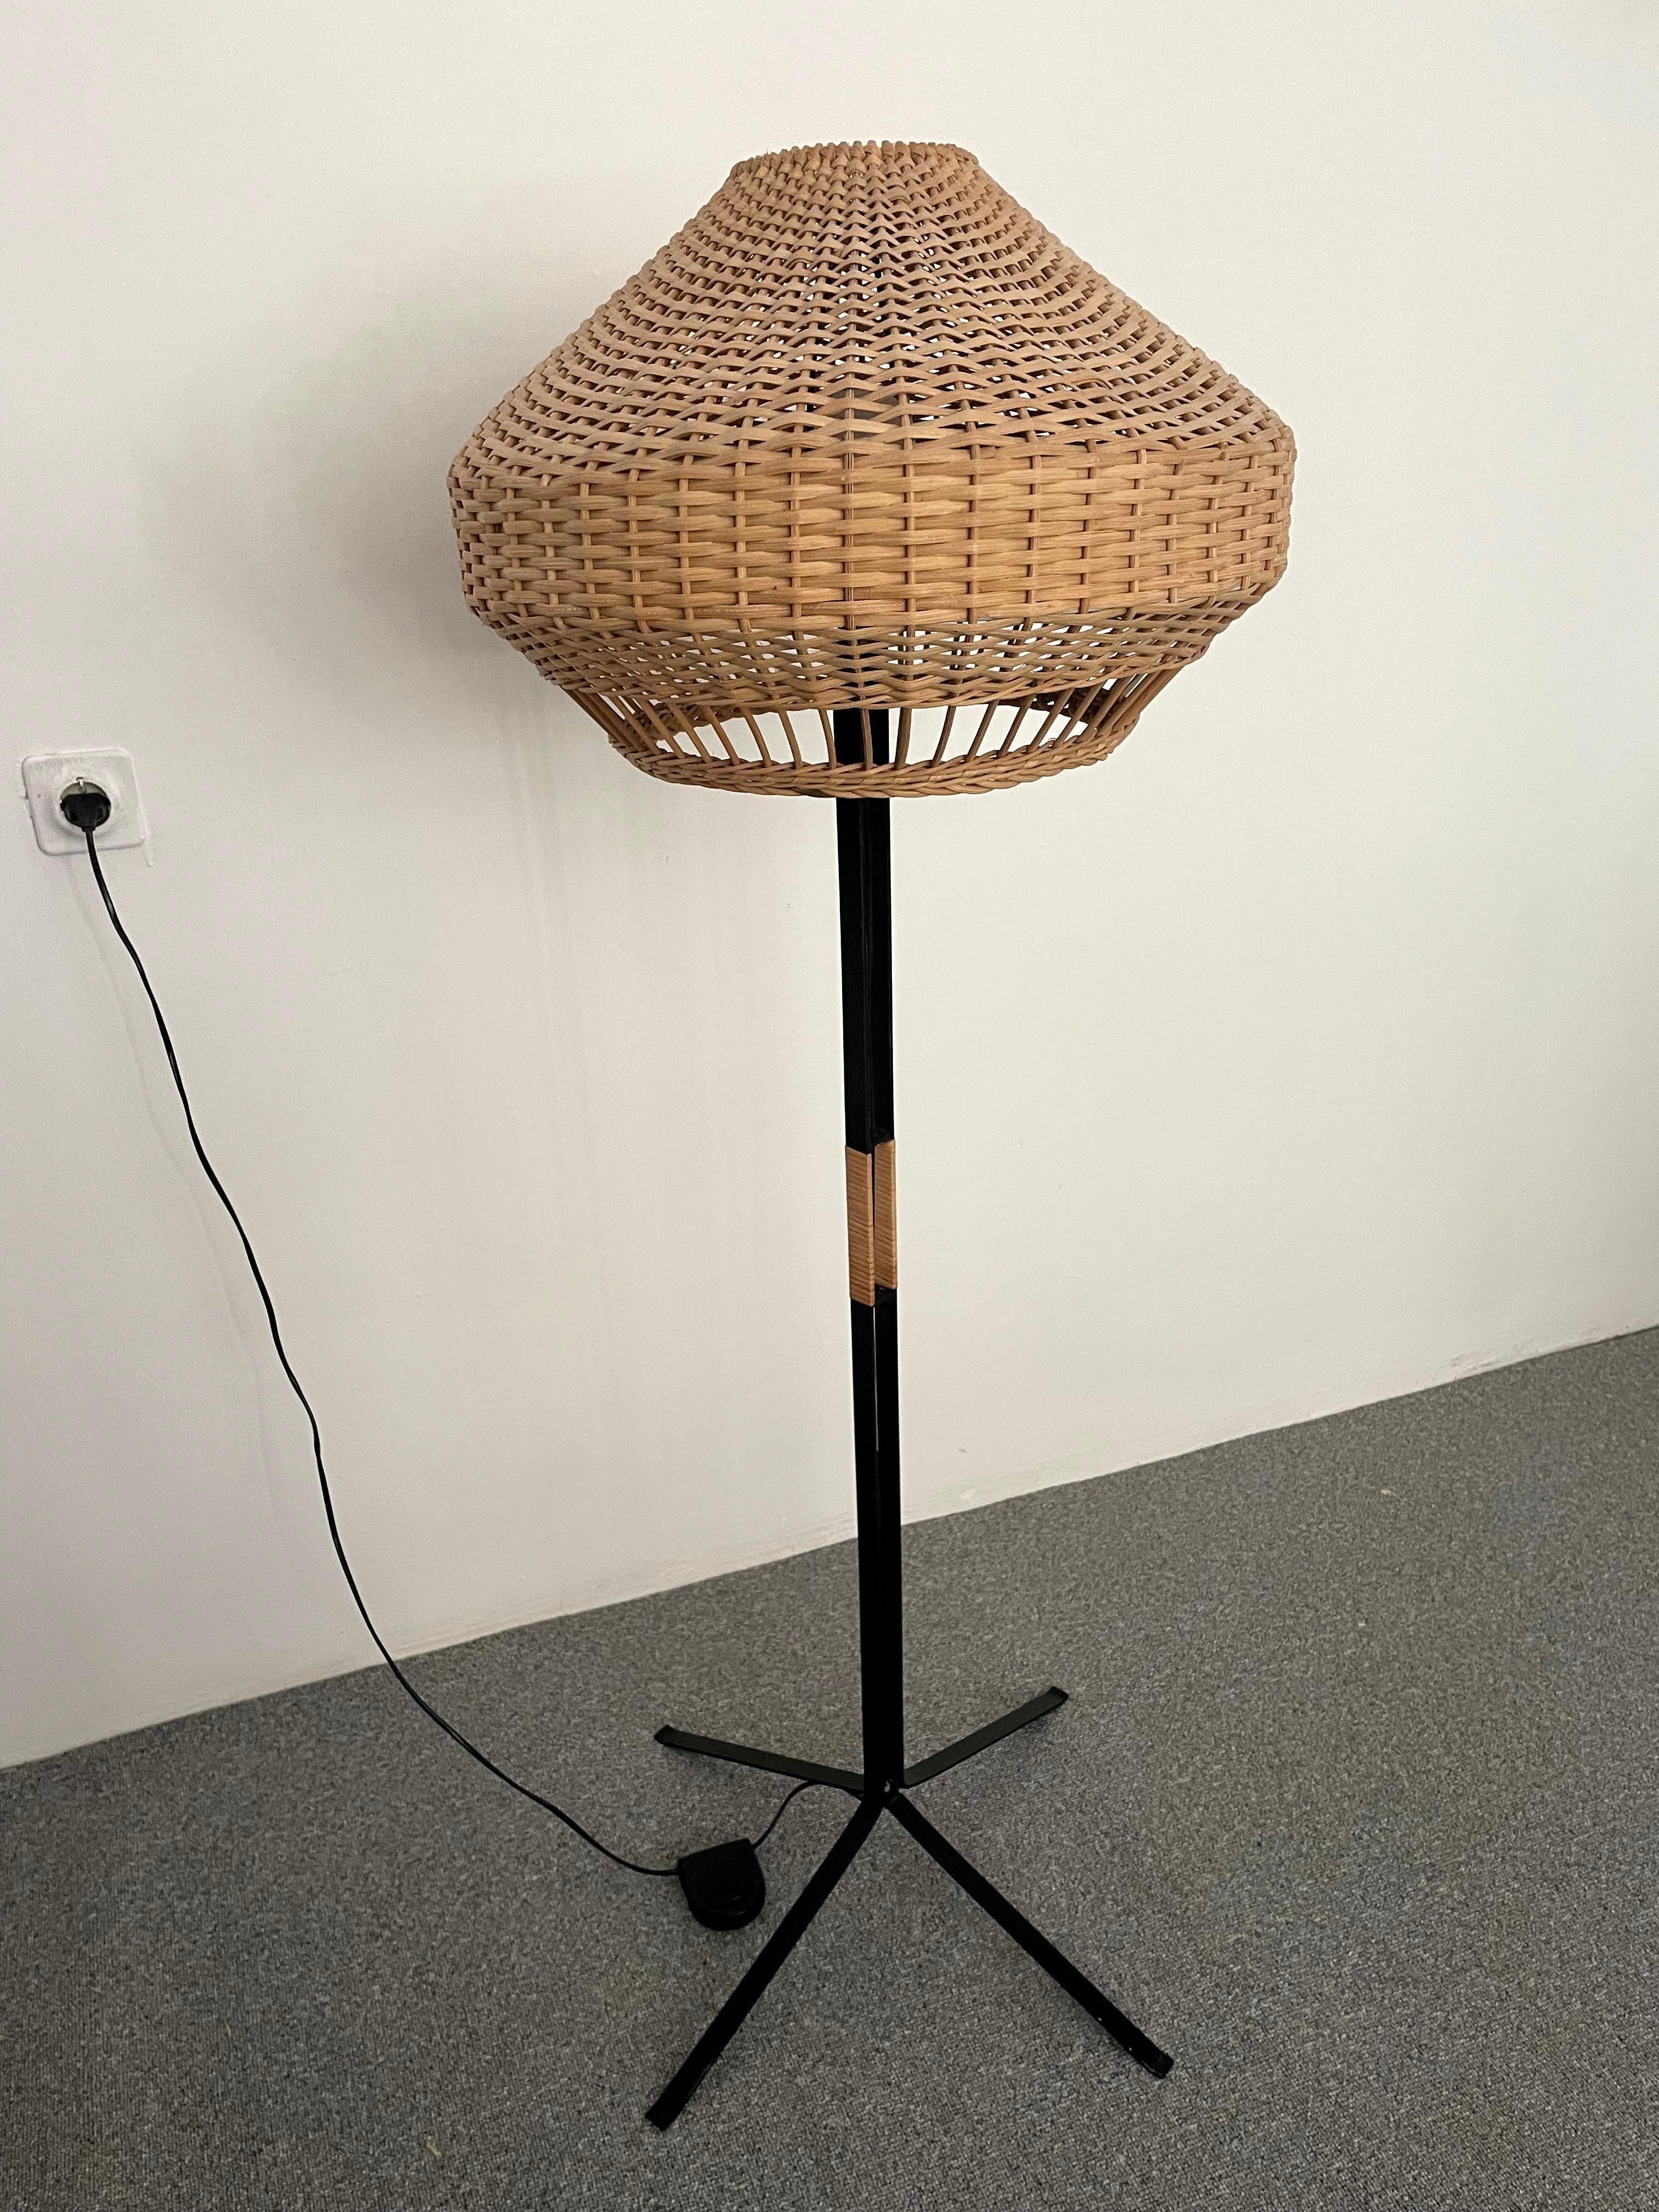 20th Century Unique  Modernist Iron and Wicker Floor Lamp, Hungary, 1950s